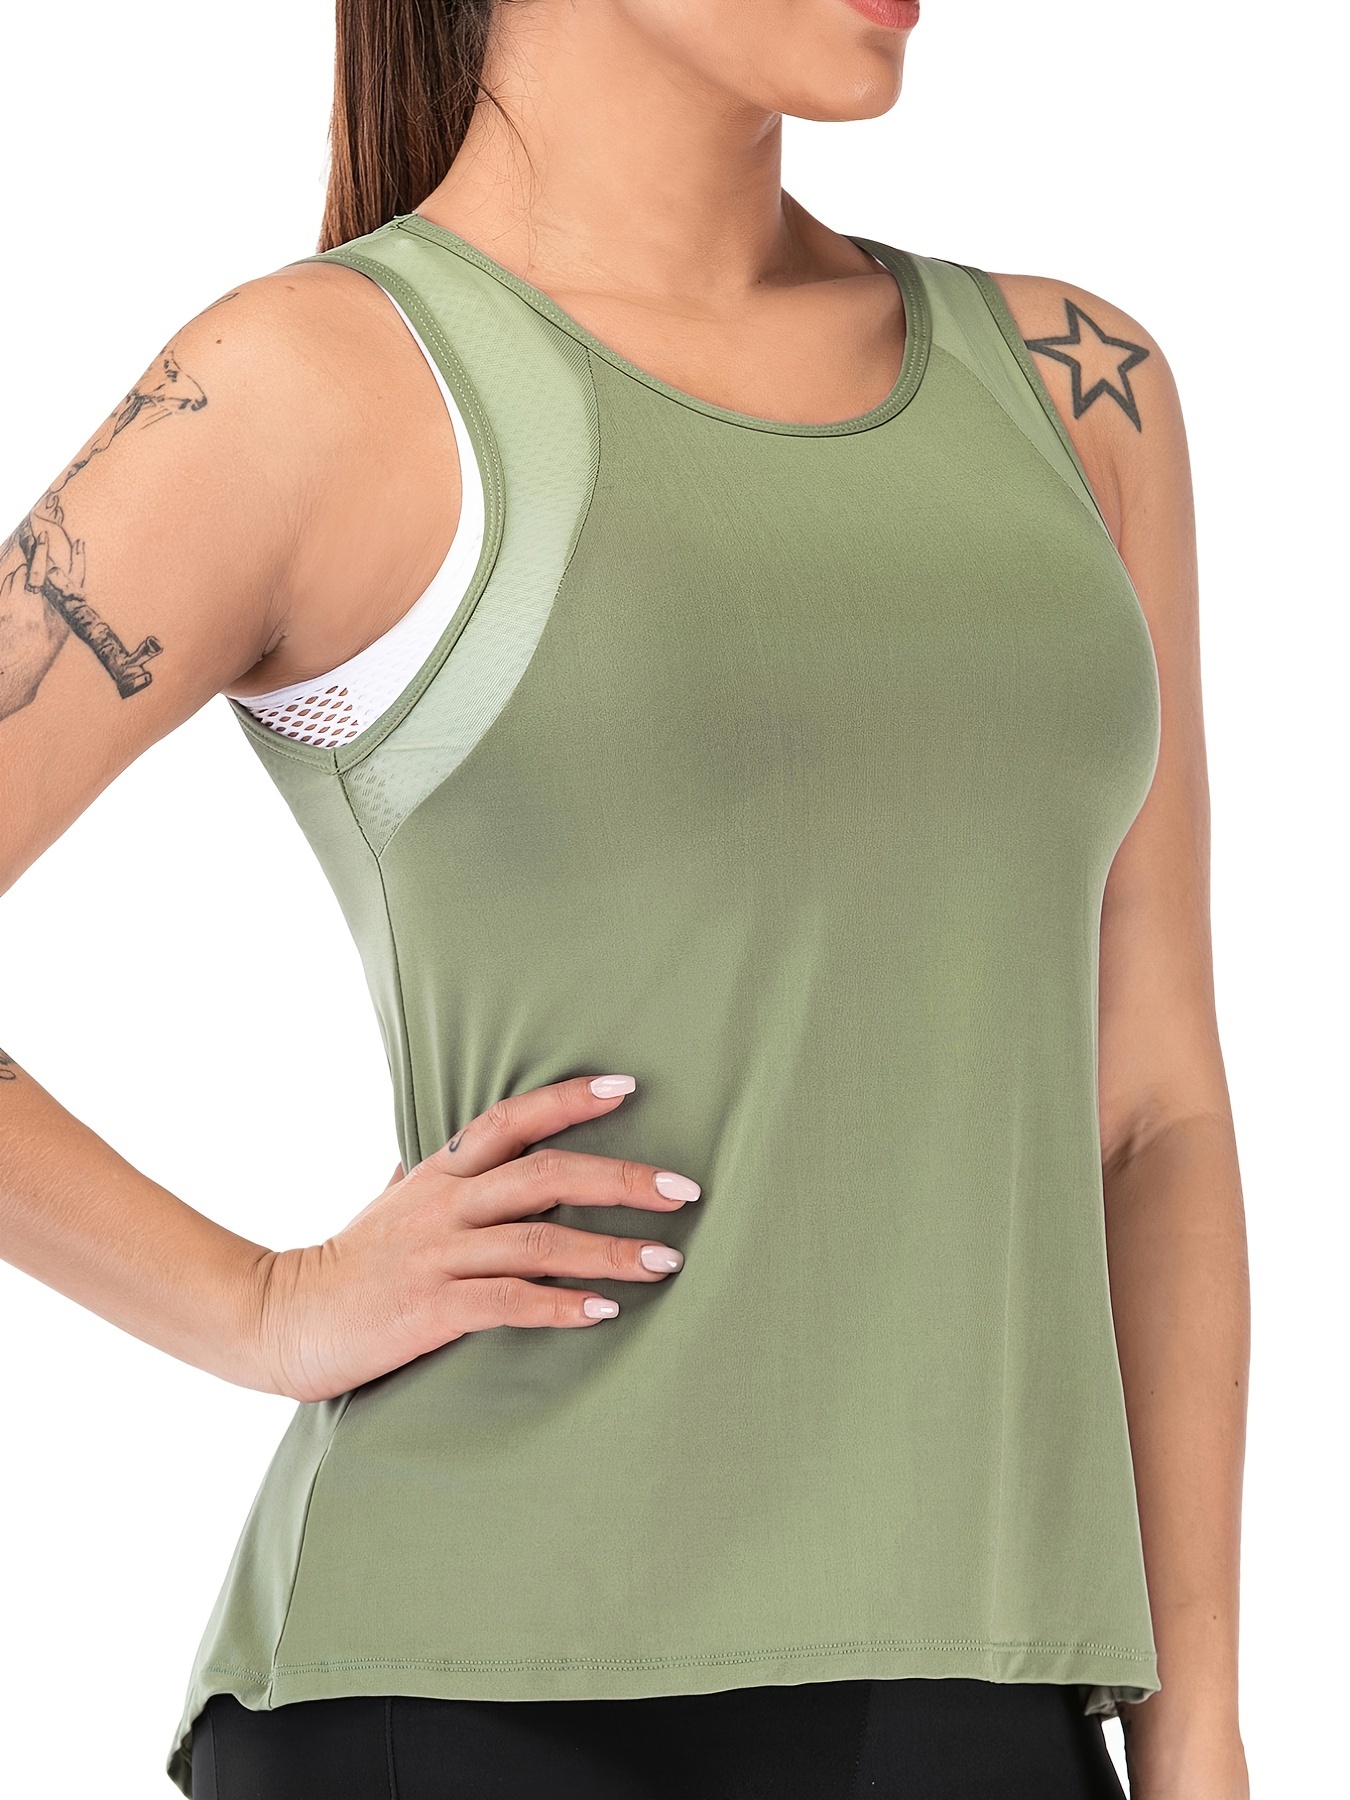 Women's Backless Cami Workout Sports Running Tank Top, Athletic Yoga Tops,  Women's Summer Tops